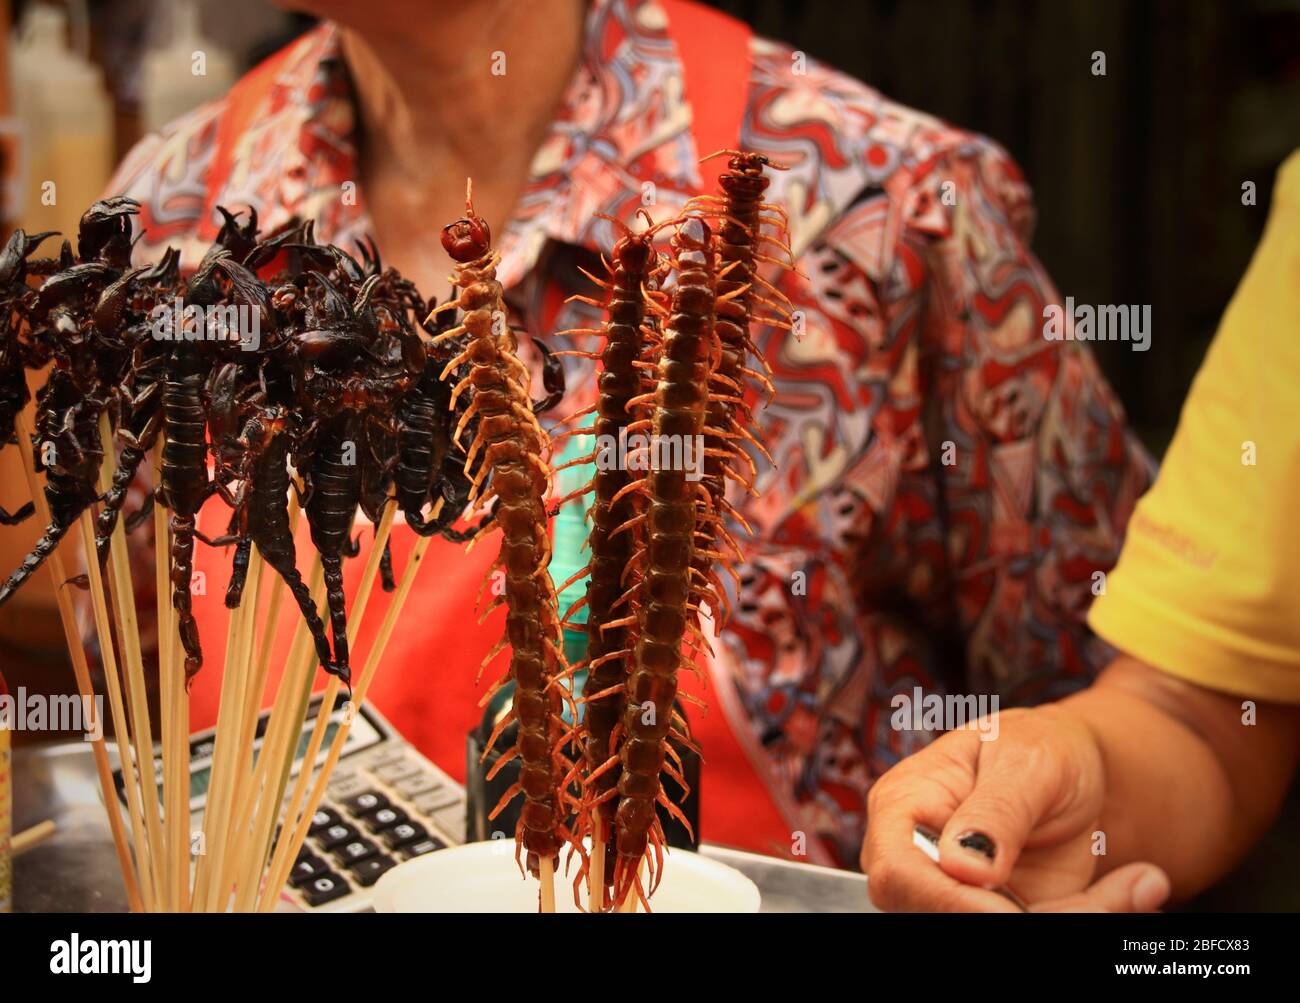 Fried centipedes and scorpions, exotic and traditional street food that shows the culture and cuisine of Thailand Stock Photo